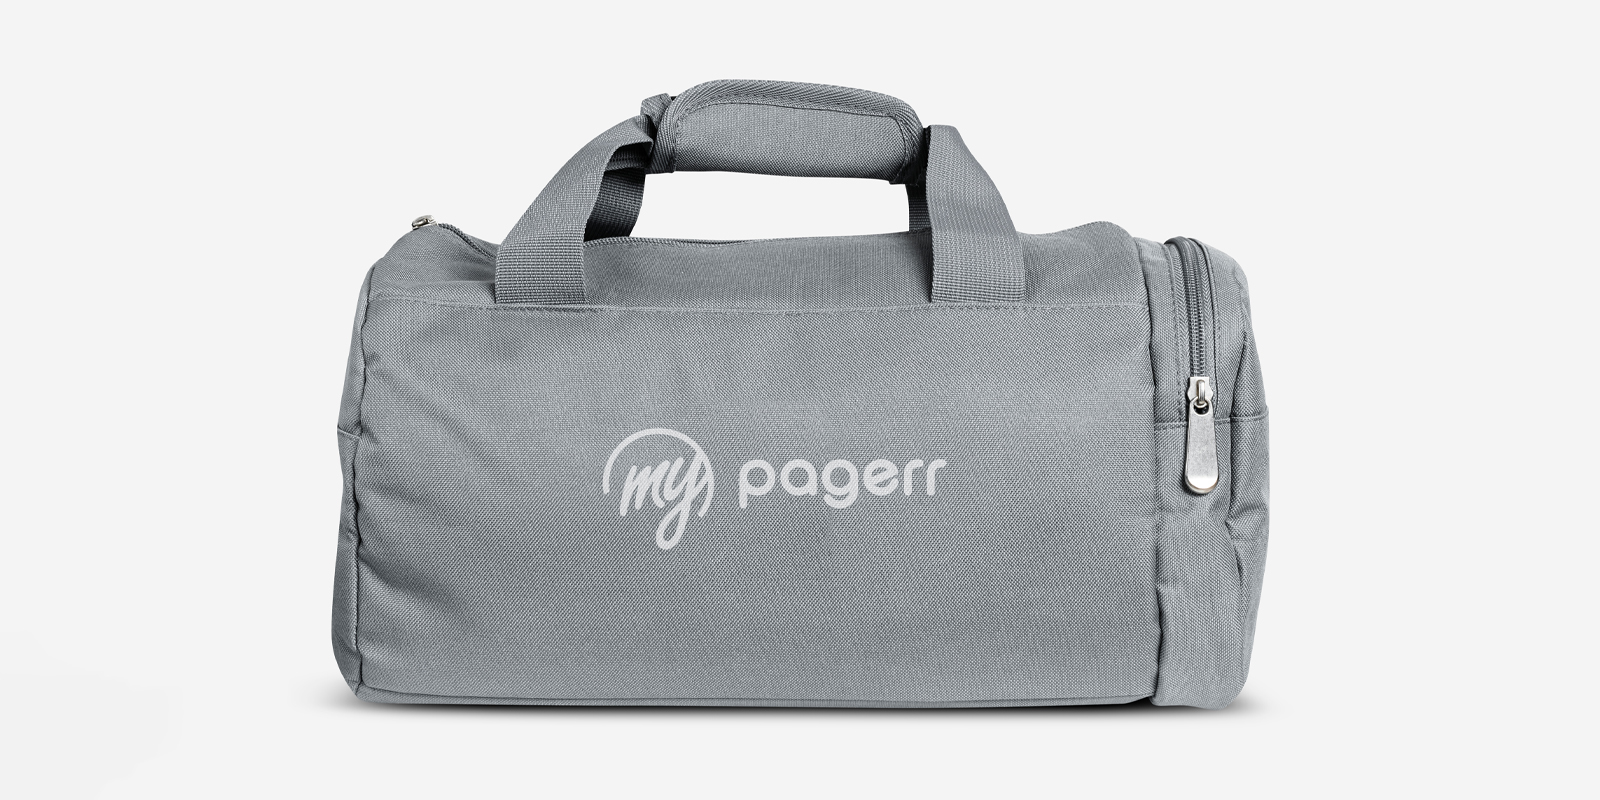 Duffel & gym bags in Melbourne - Print with Pagerr